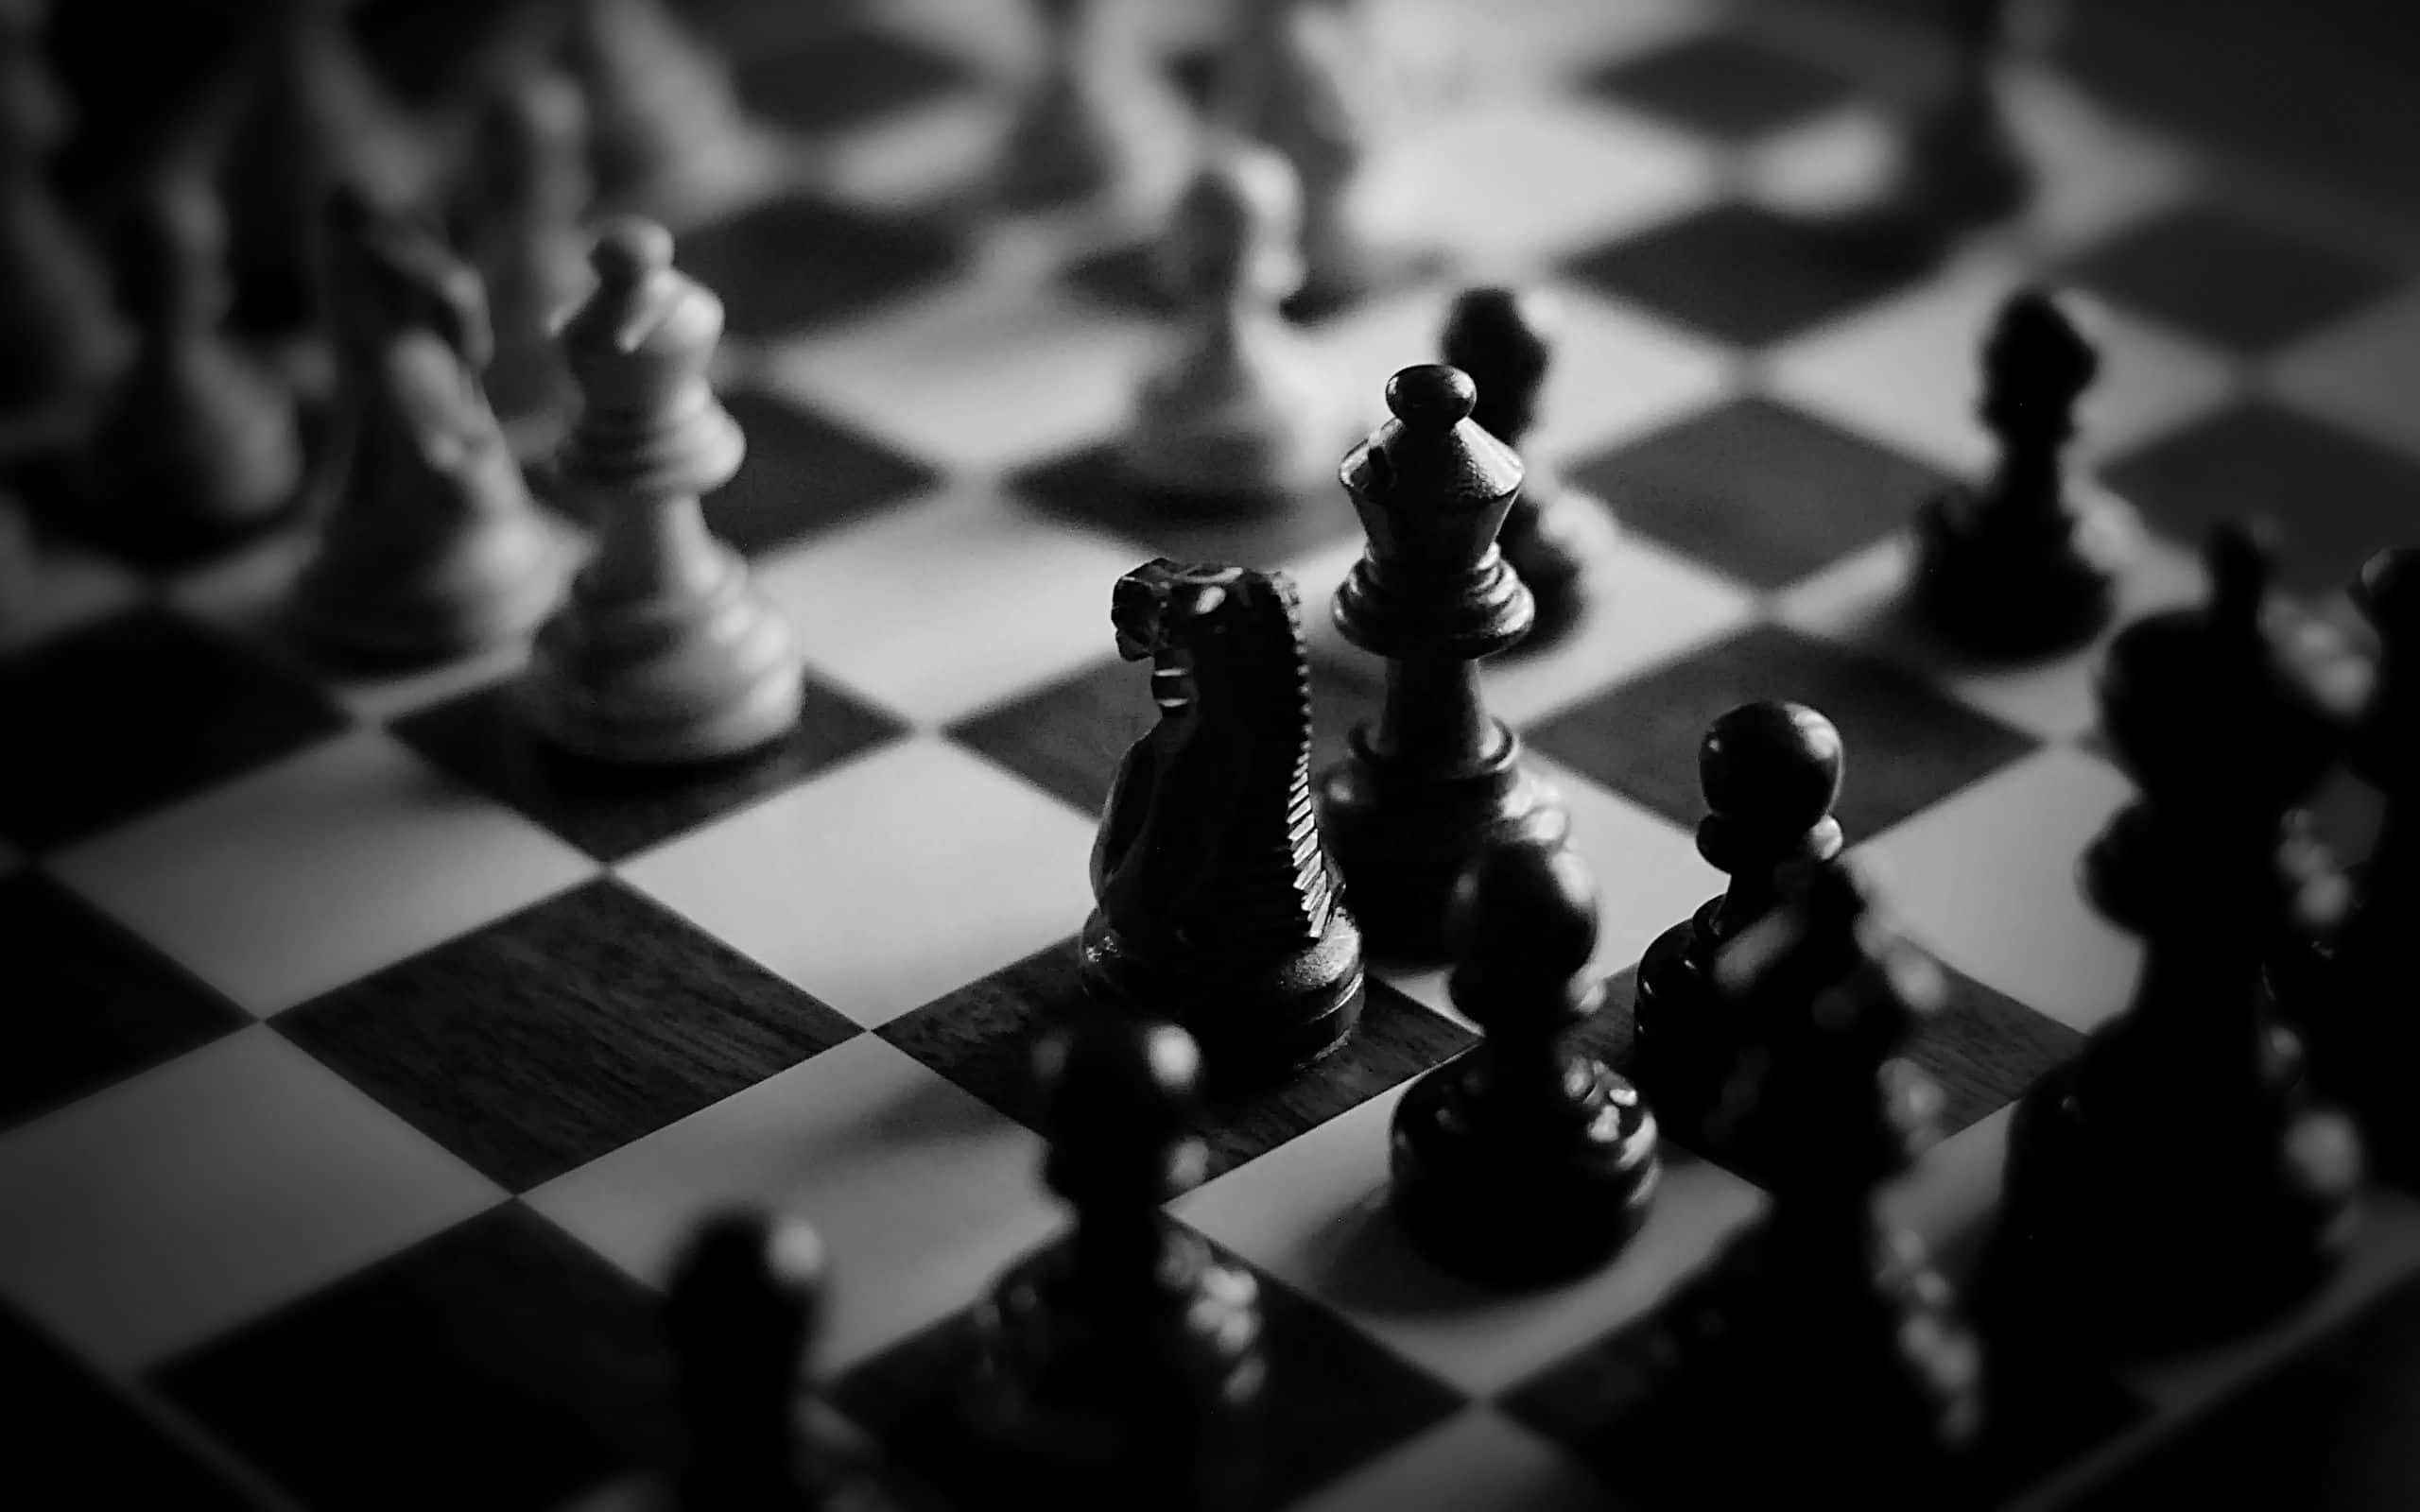 Wooden Chess Set In A Dark Room Background, Cool Chess Picture, Game, Chess  Background Image And Wallpaper for Free Download